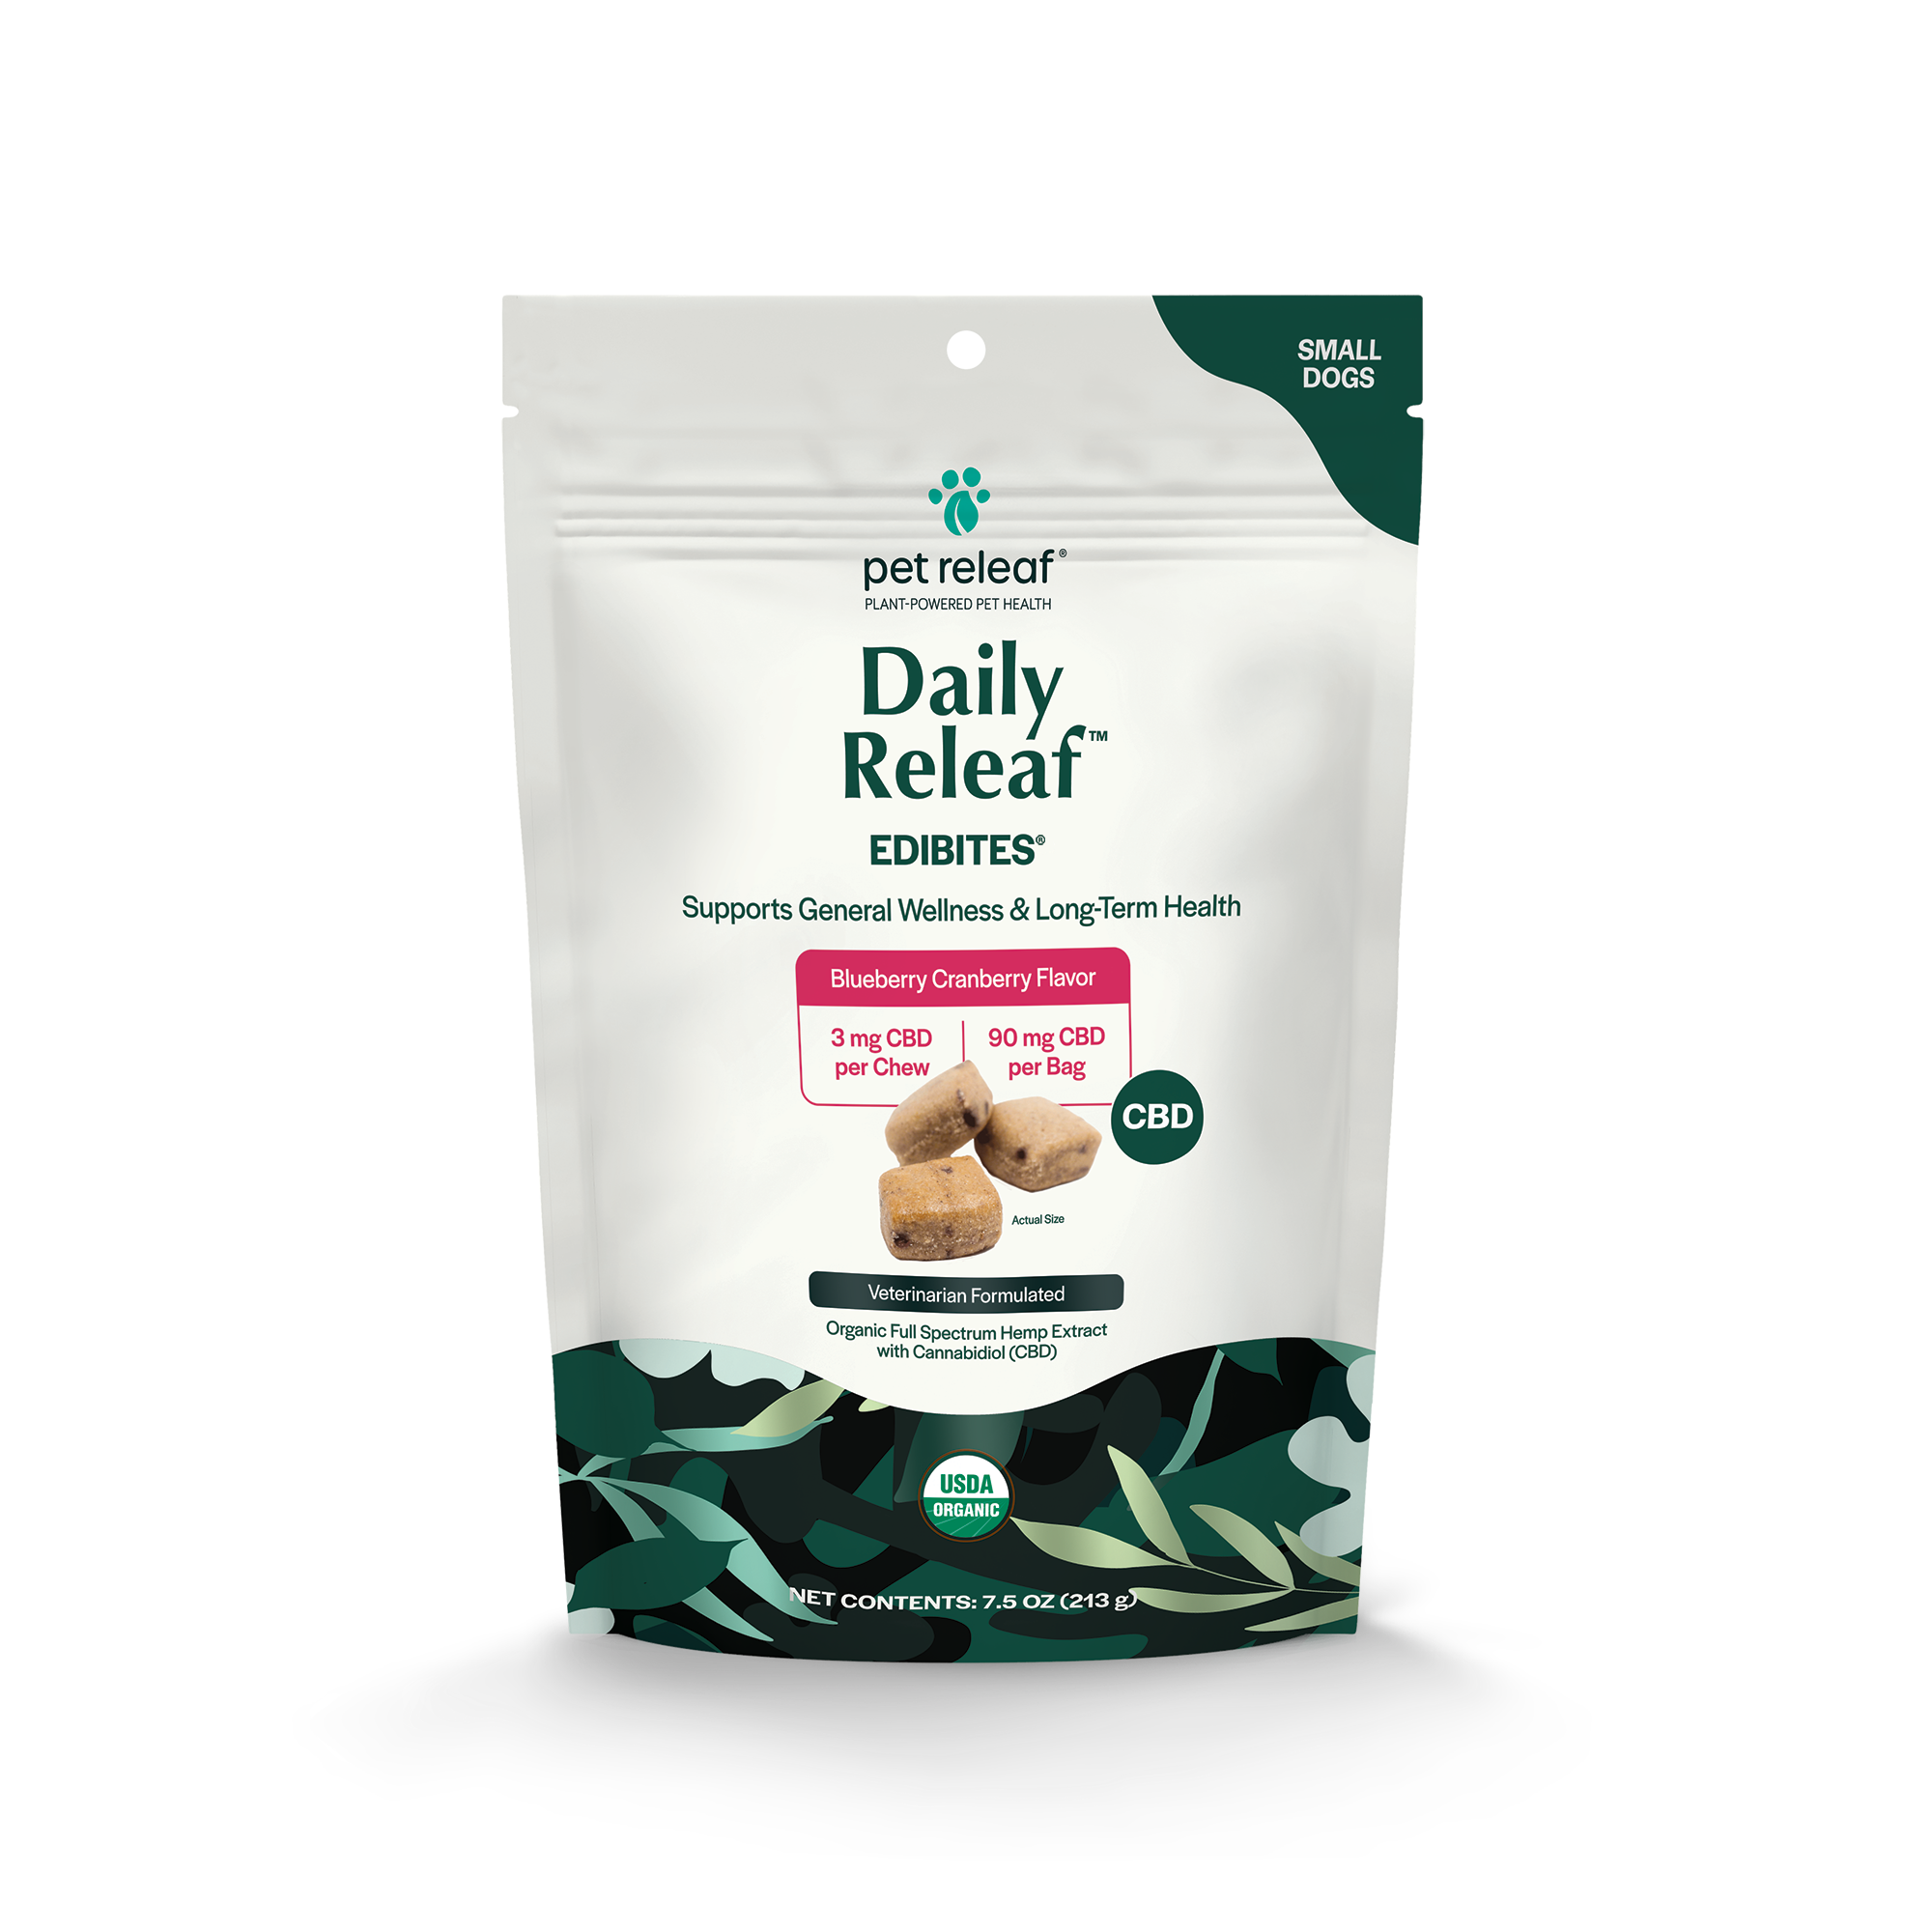 Daily Releaf Edibites for Small Dogs - Blueberry Cranberry Flavor